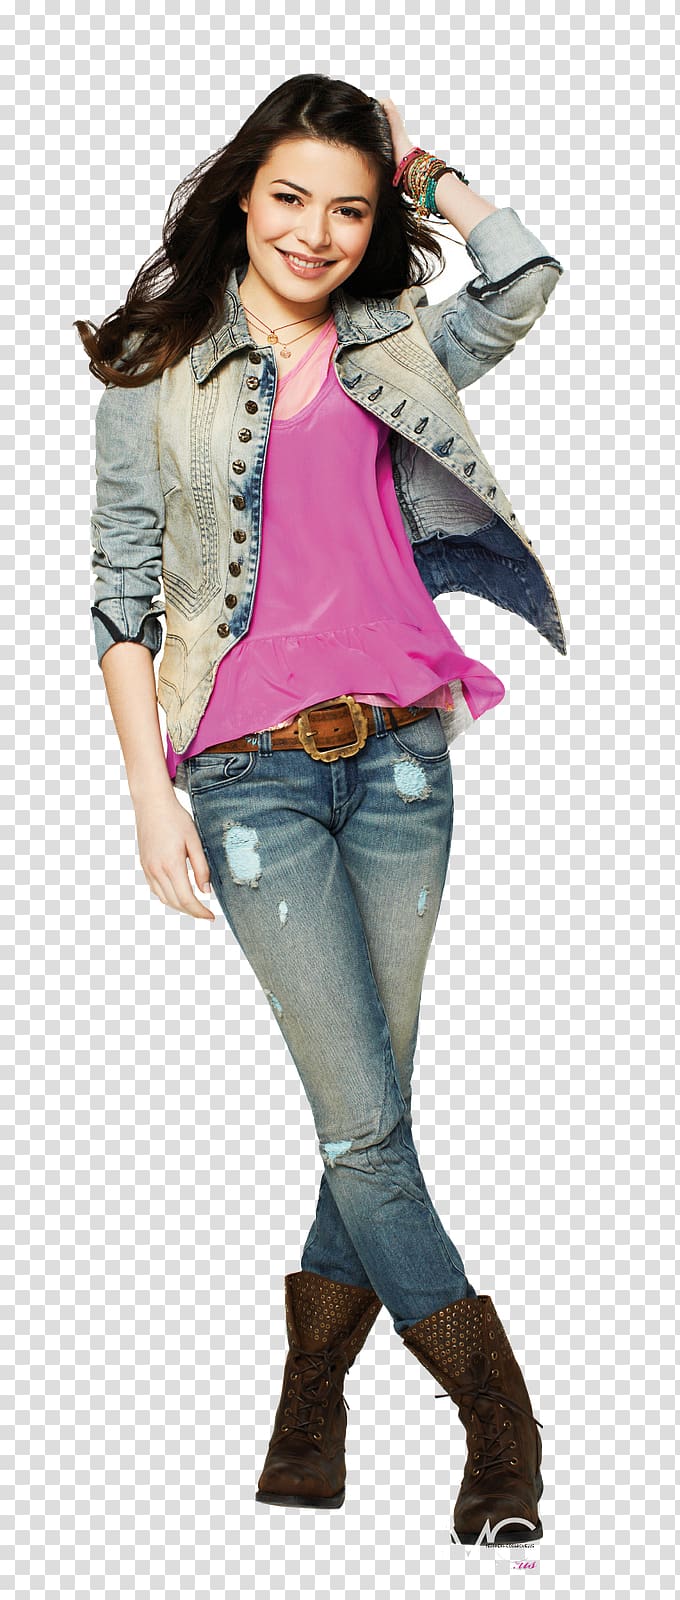 Miranda Cosgrove iCarly Cast Sam Puckett Carly Shay, others transparent background PNG clipart